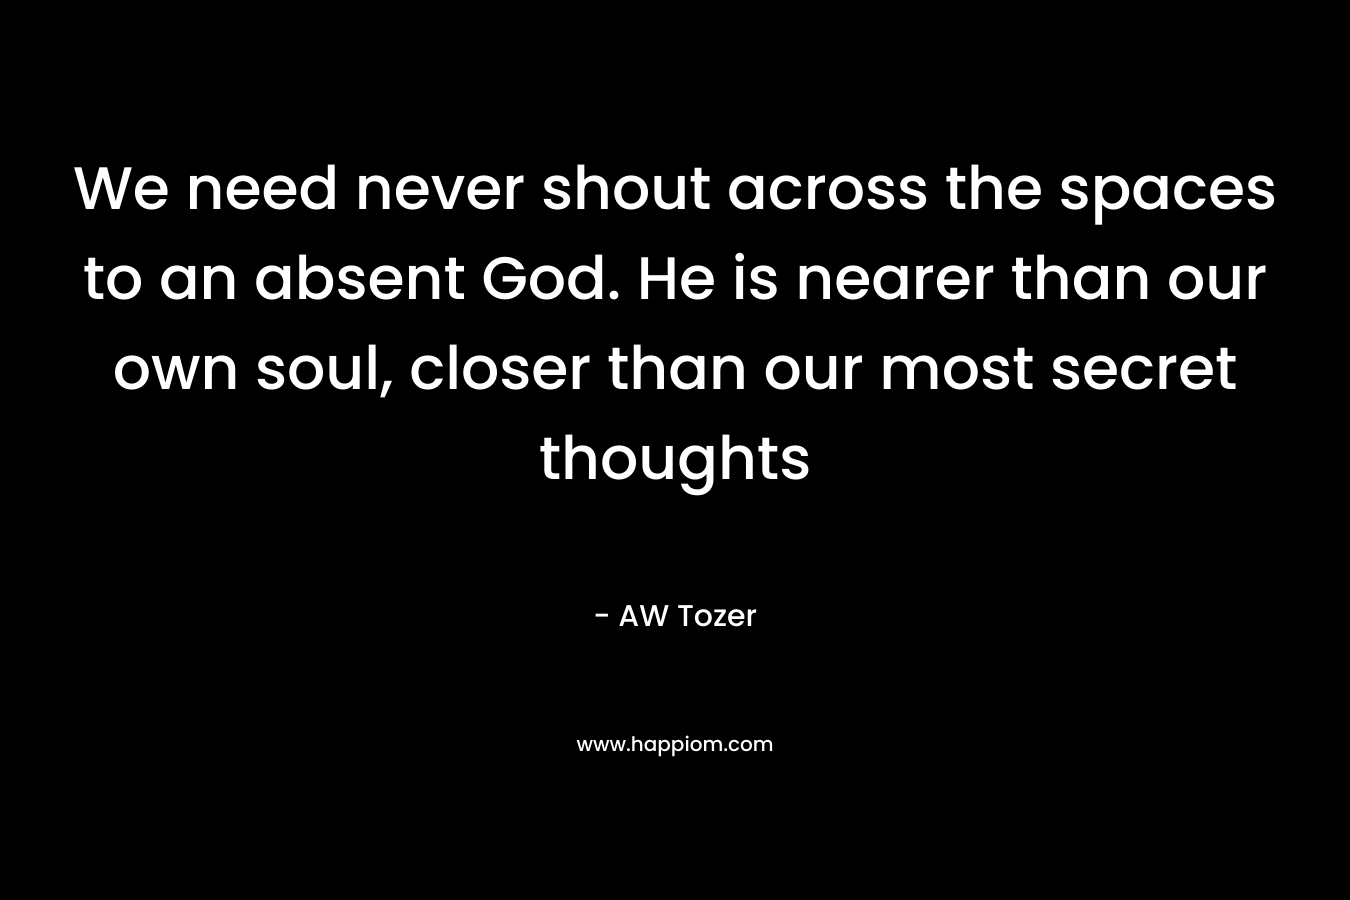 We need never shout across the spaces to an absent God. He is nearer than our own soul, closer than our most secret thoughts – AW Tozer